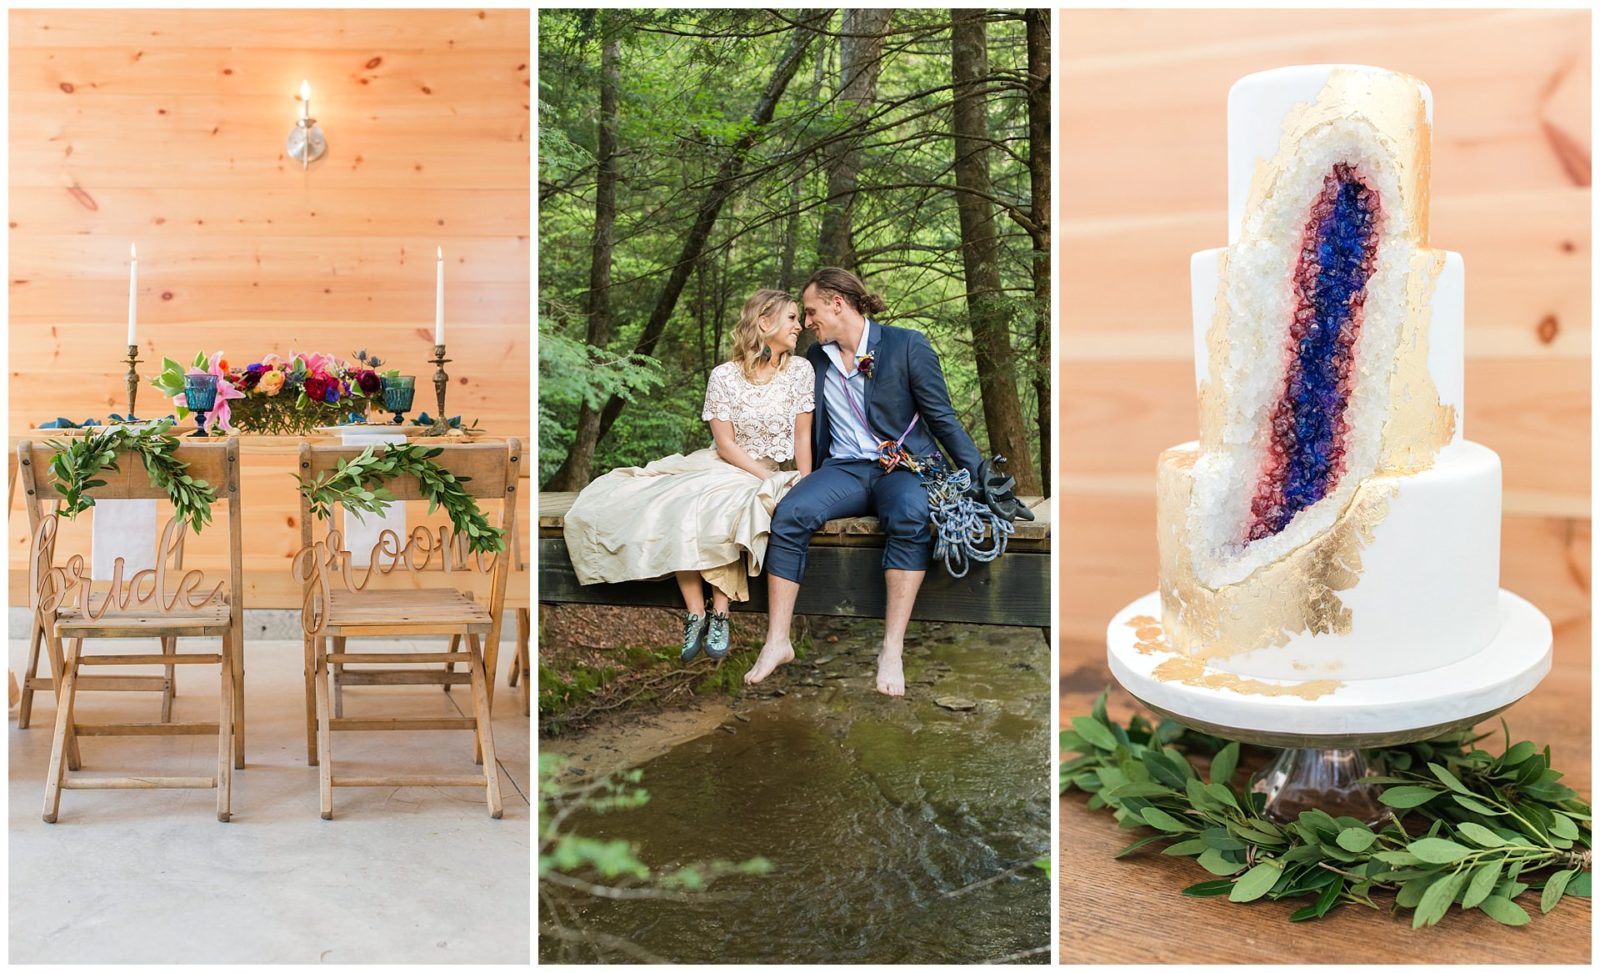 Adventure wedding styled shoot at Events at Hemlock Springs in the Red River Gorge in Kentucky